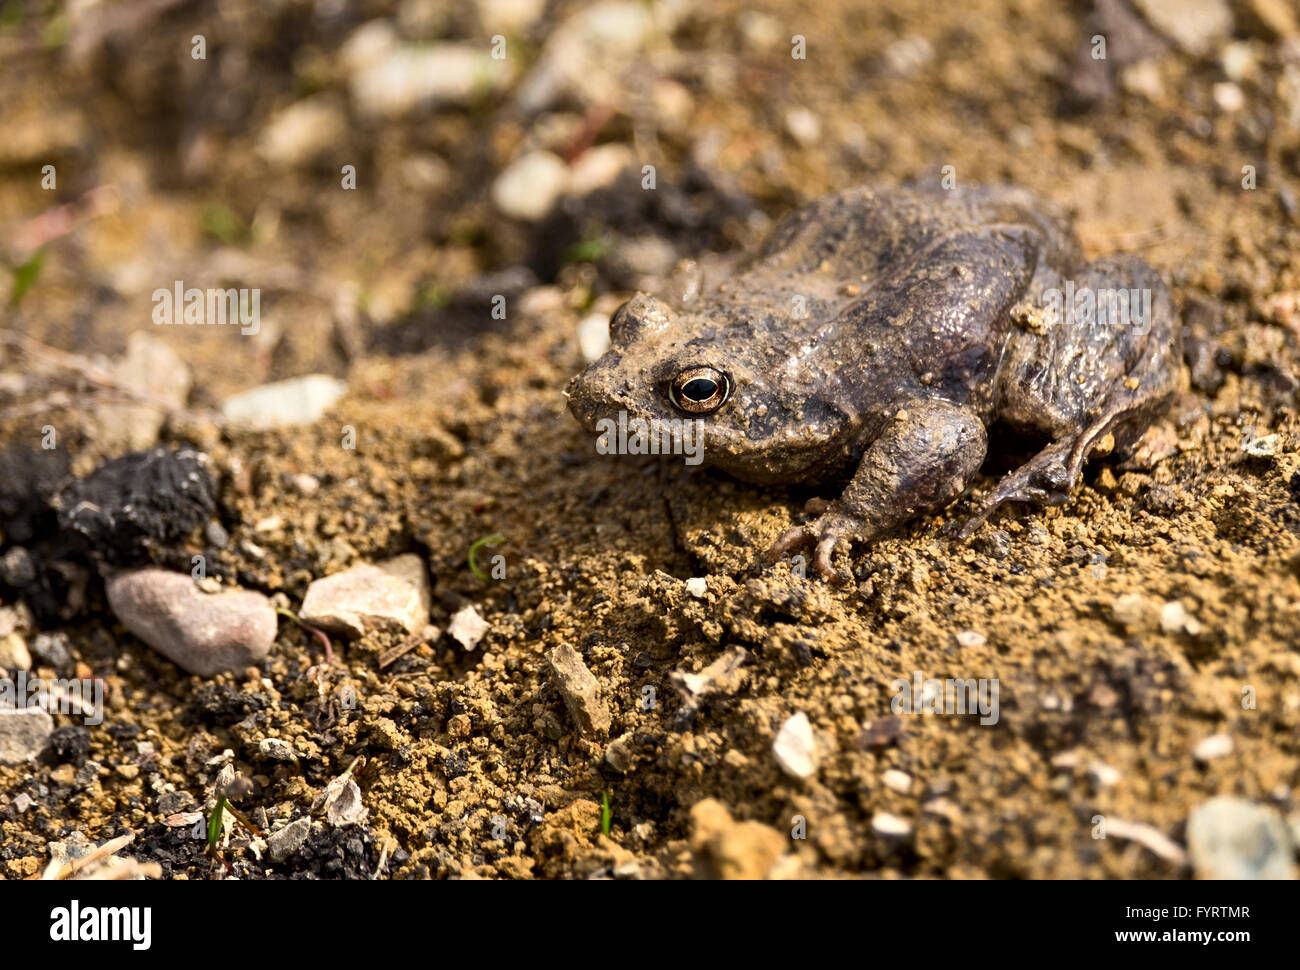 Frog with natural camouflage close-up Stock Photo